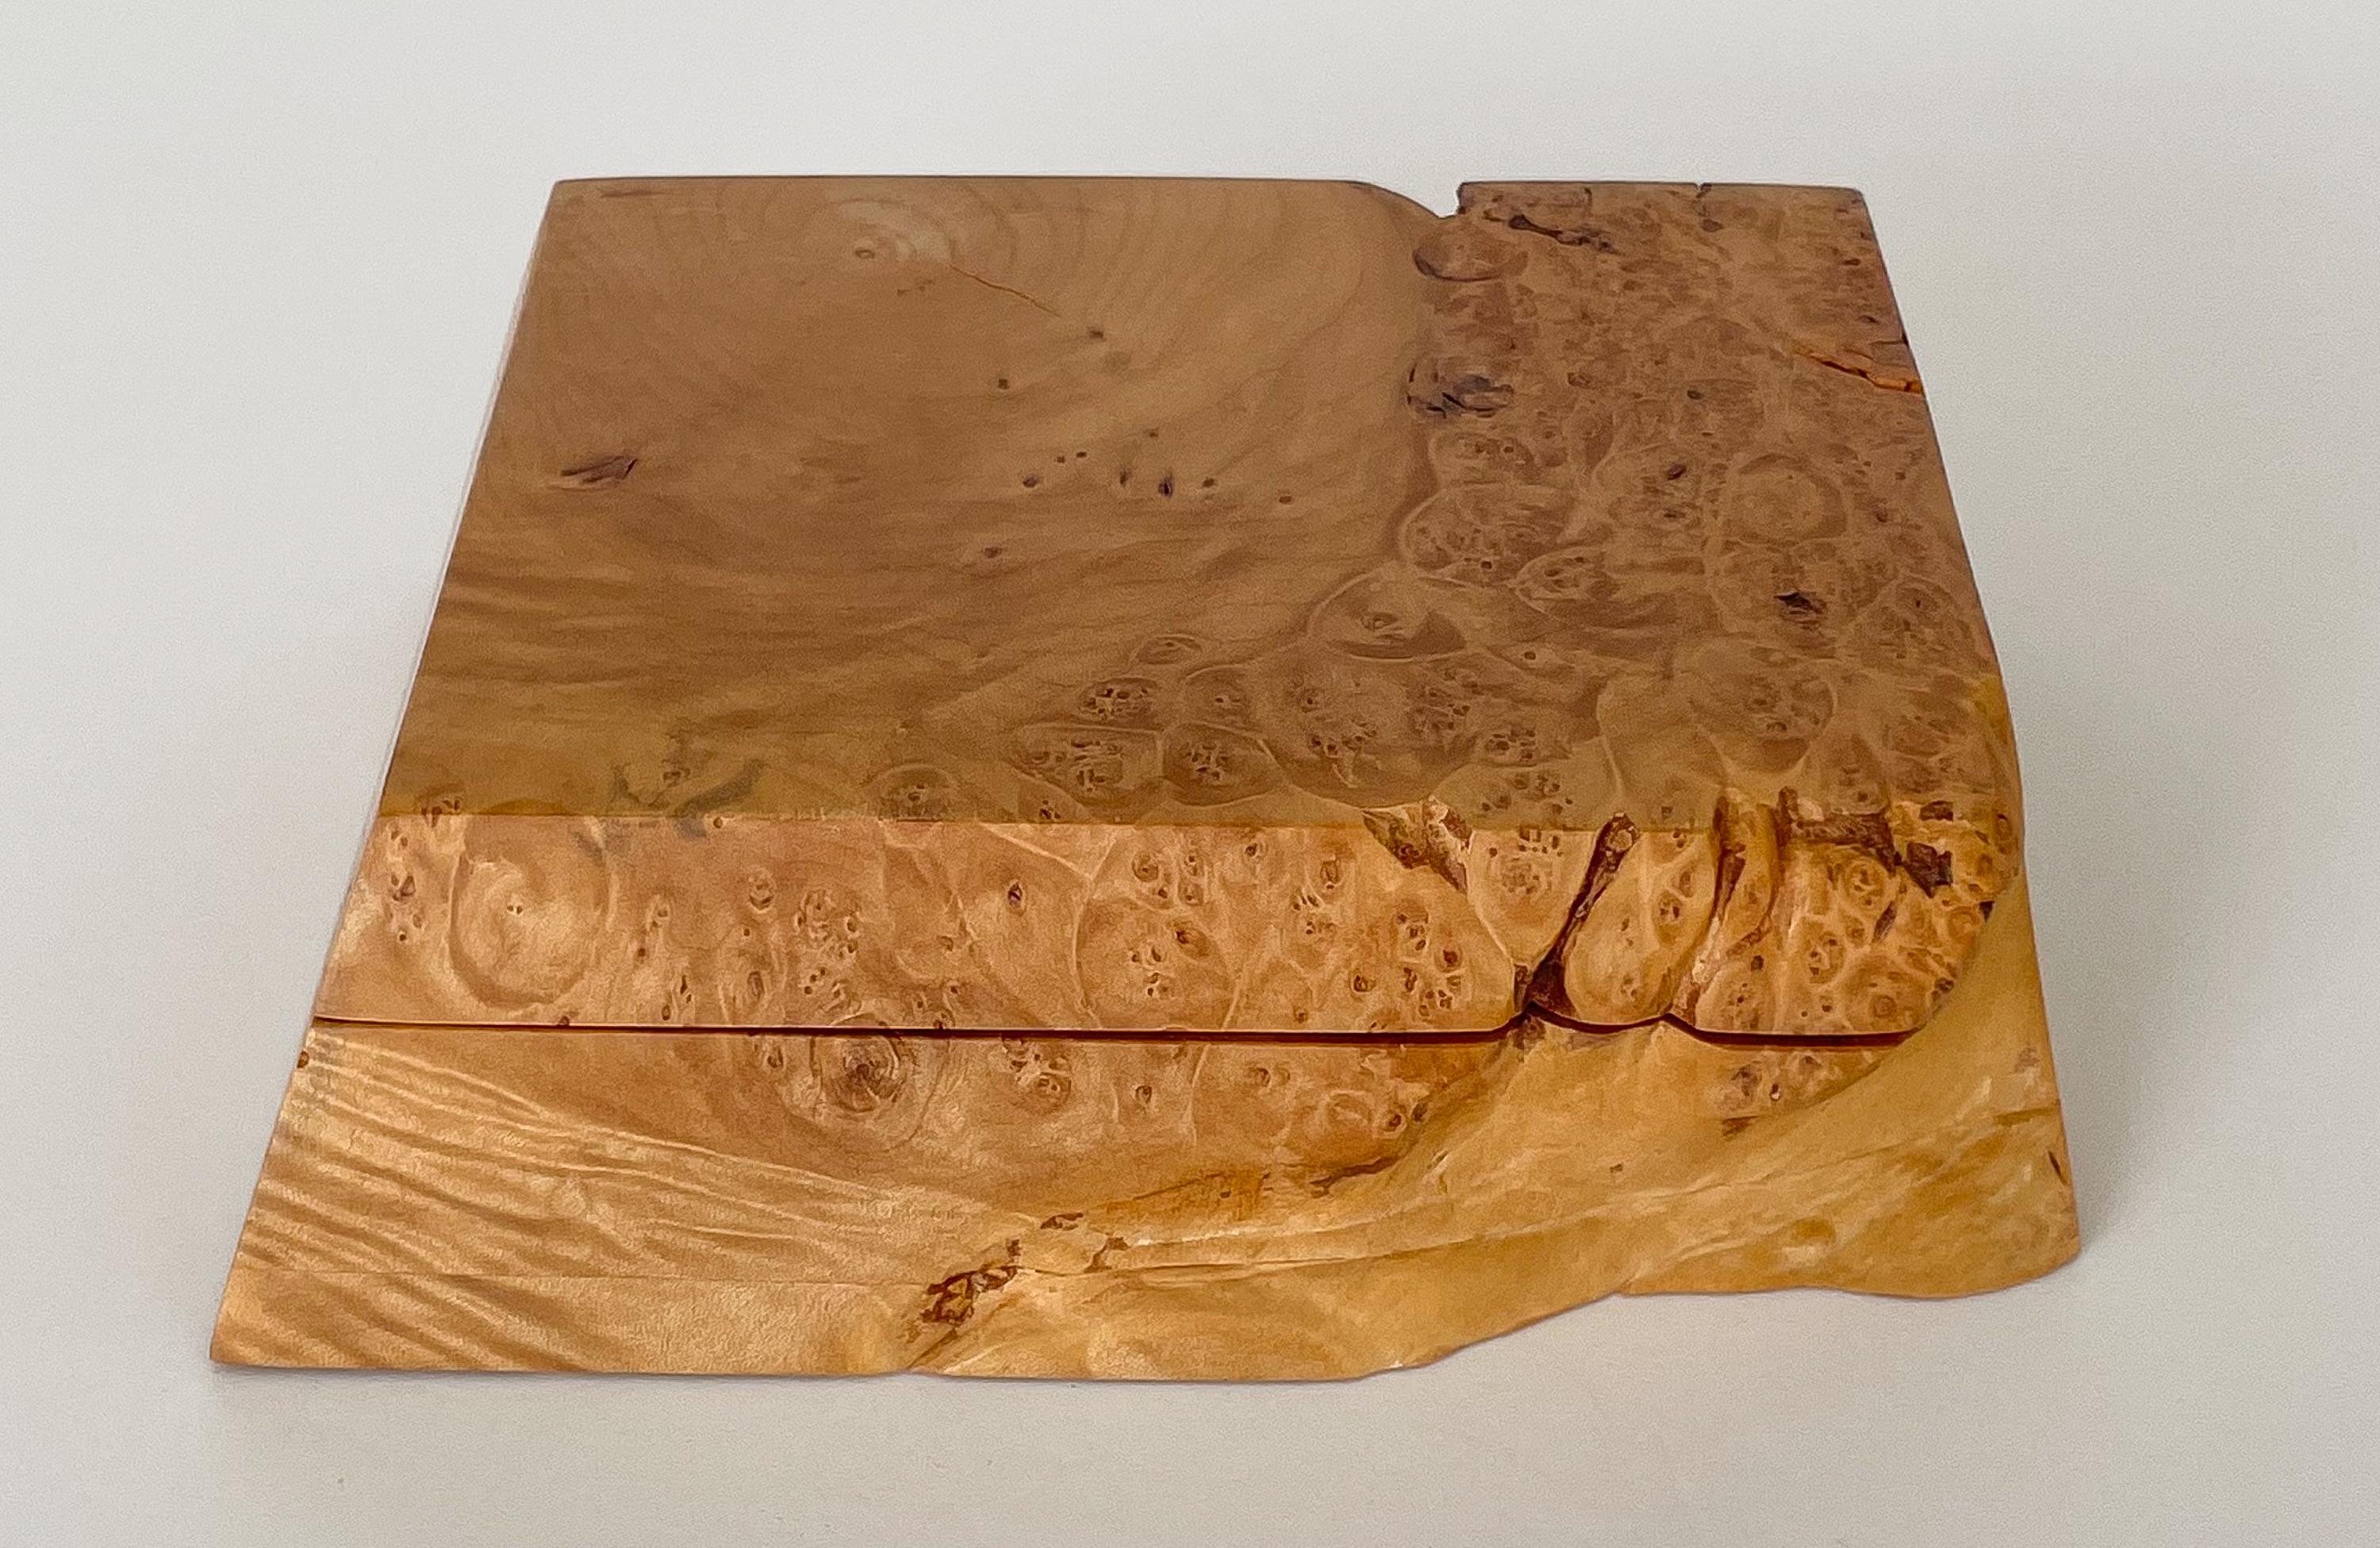 Michael Elkan studio craft carved burl wood box, circa 1980s. This trinket / jewelry box is handcrafted from a single piece of solid burl wood. Brass hinged lid reveals two carved compartments. Beautiful rich wood tone and striking grain patterning